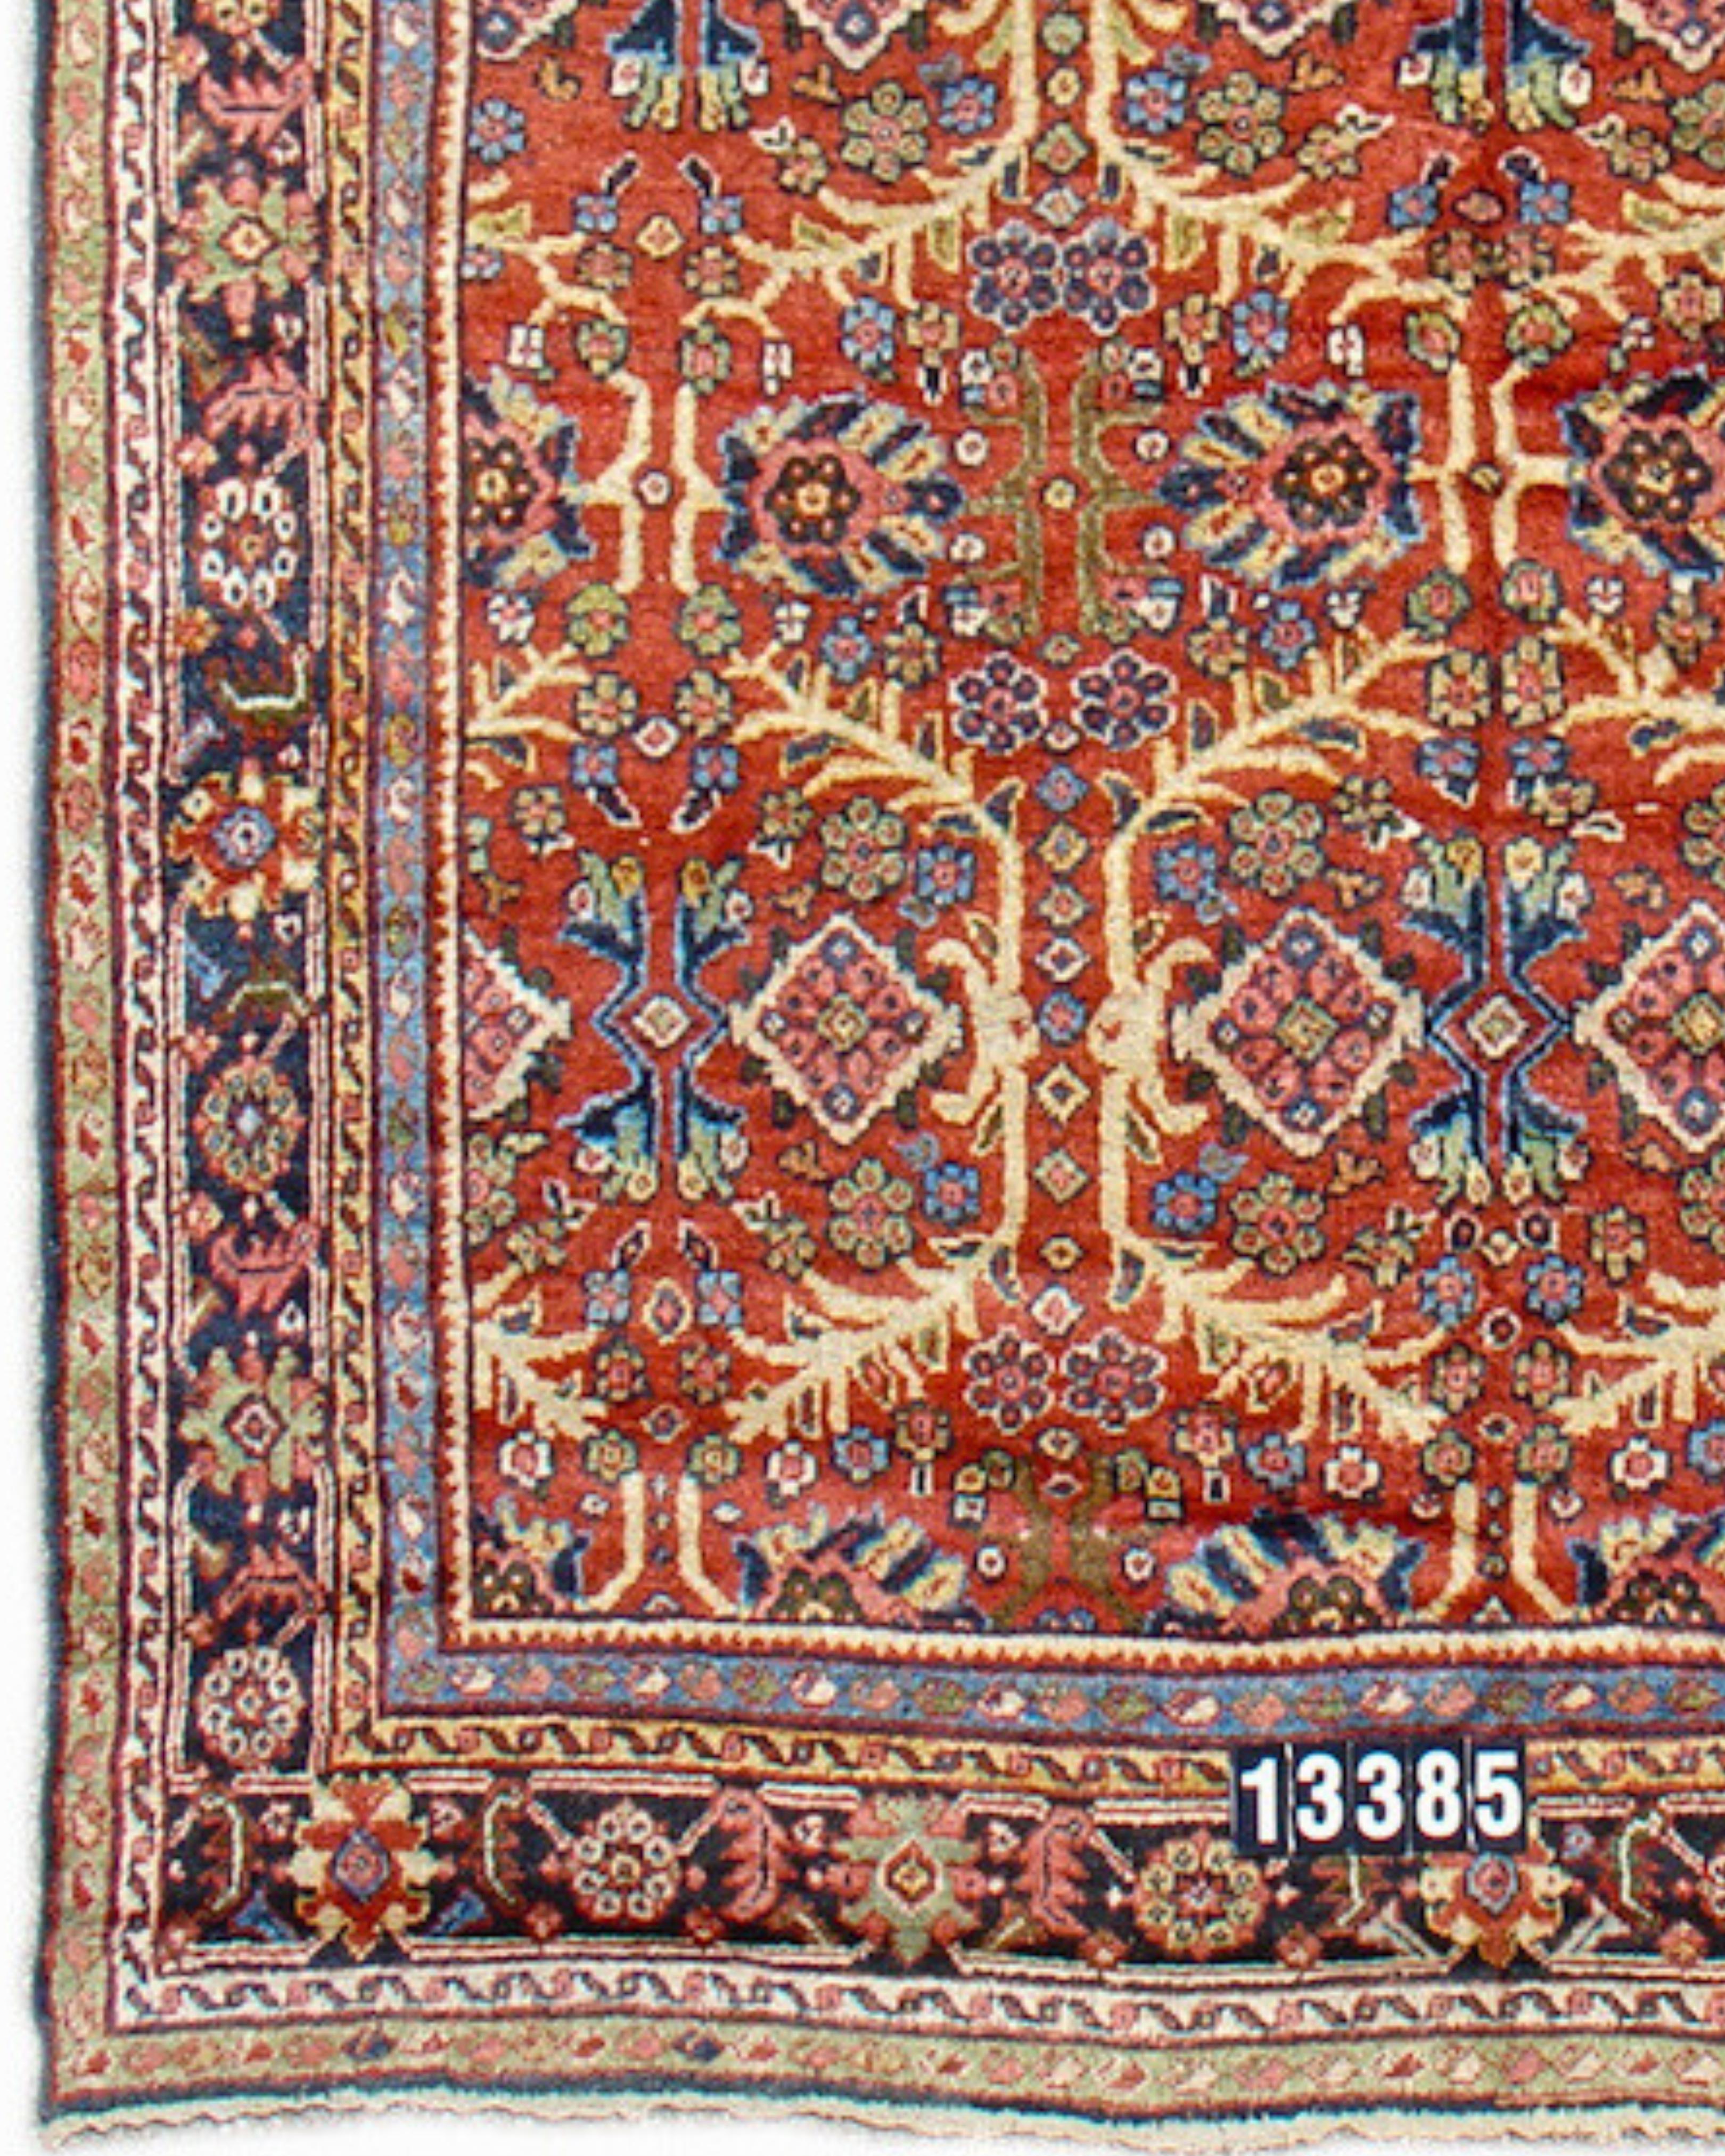 Antique Persian Mahal Rug, 19th Century In Excellent Condition For Sale In San Francisco, CA